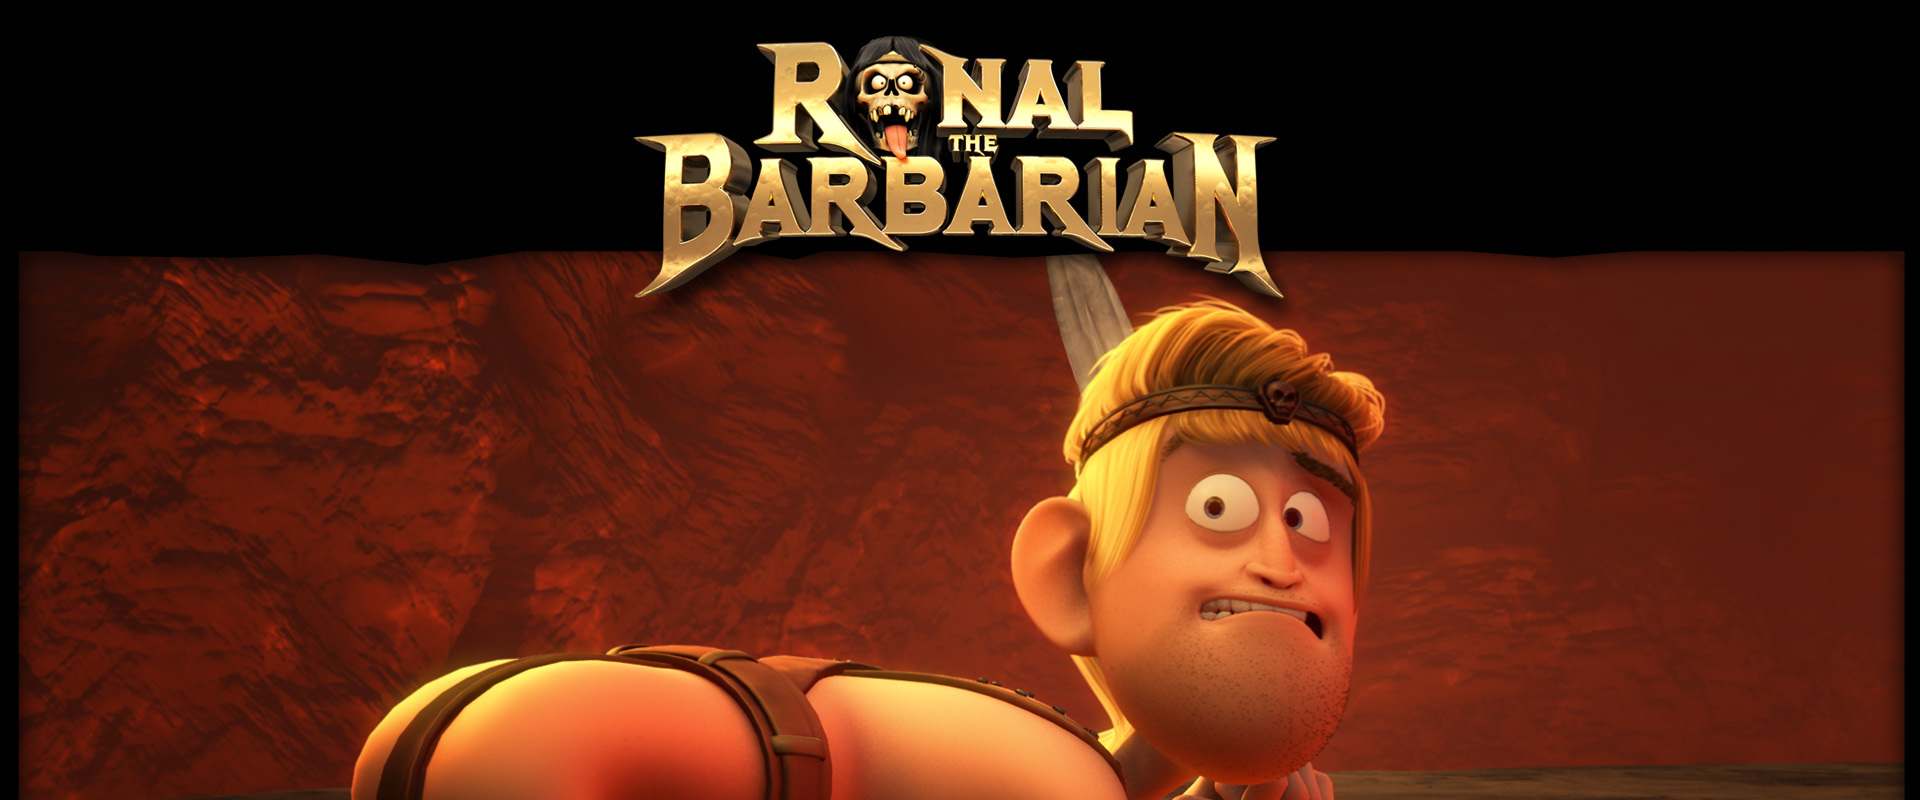 Ronal the Barbarian background 1